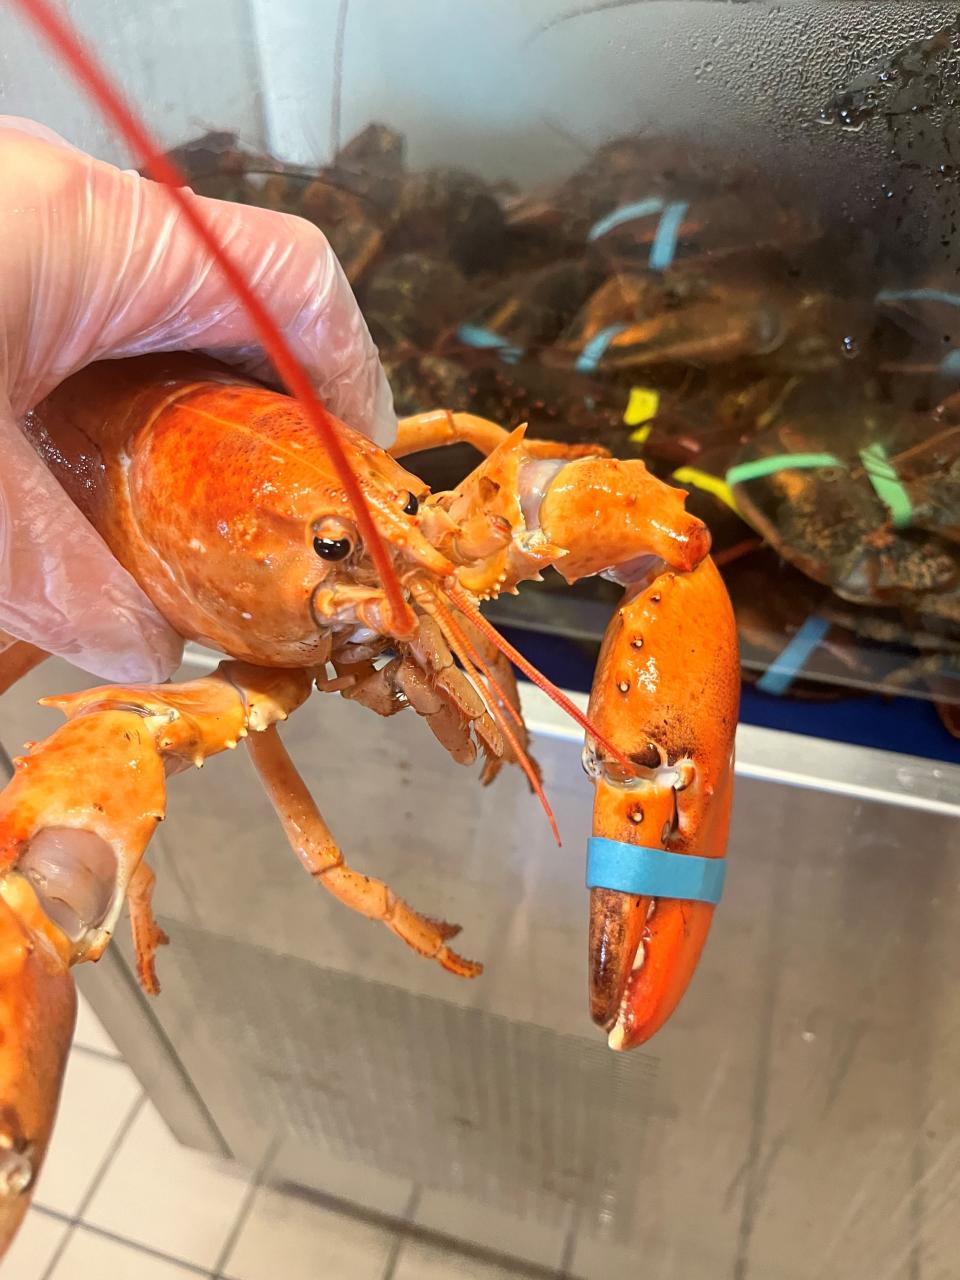 Hayes, a rare orange lobster, spotted at a supermarket in New York.